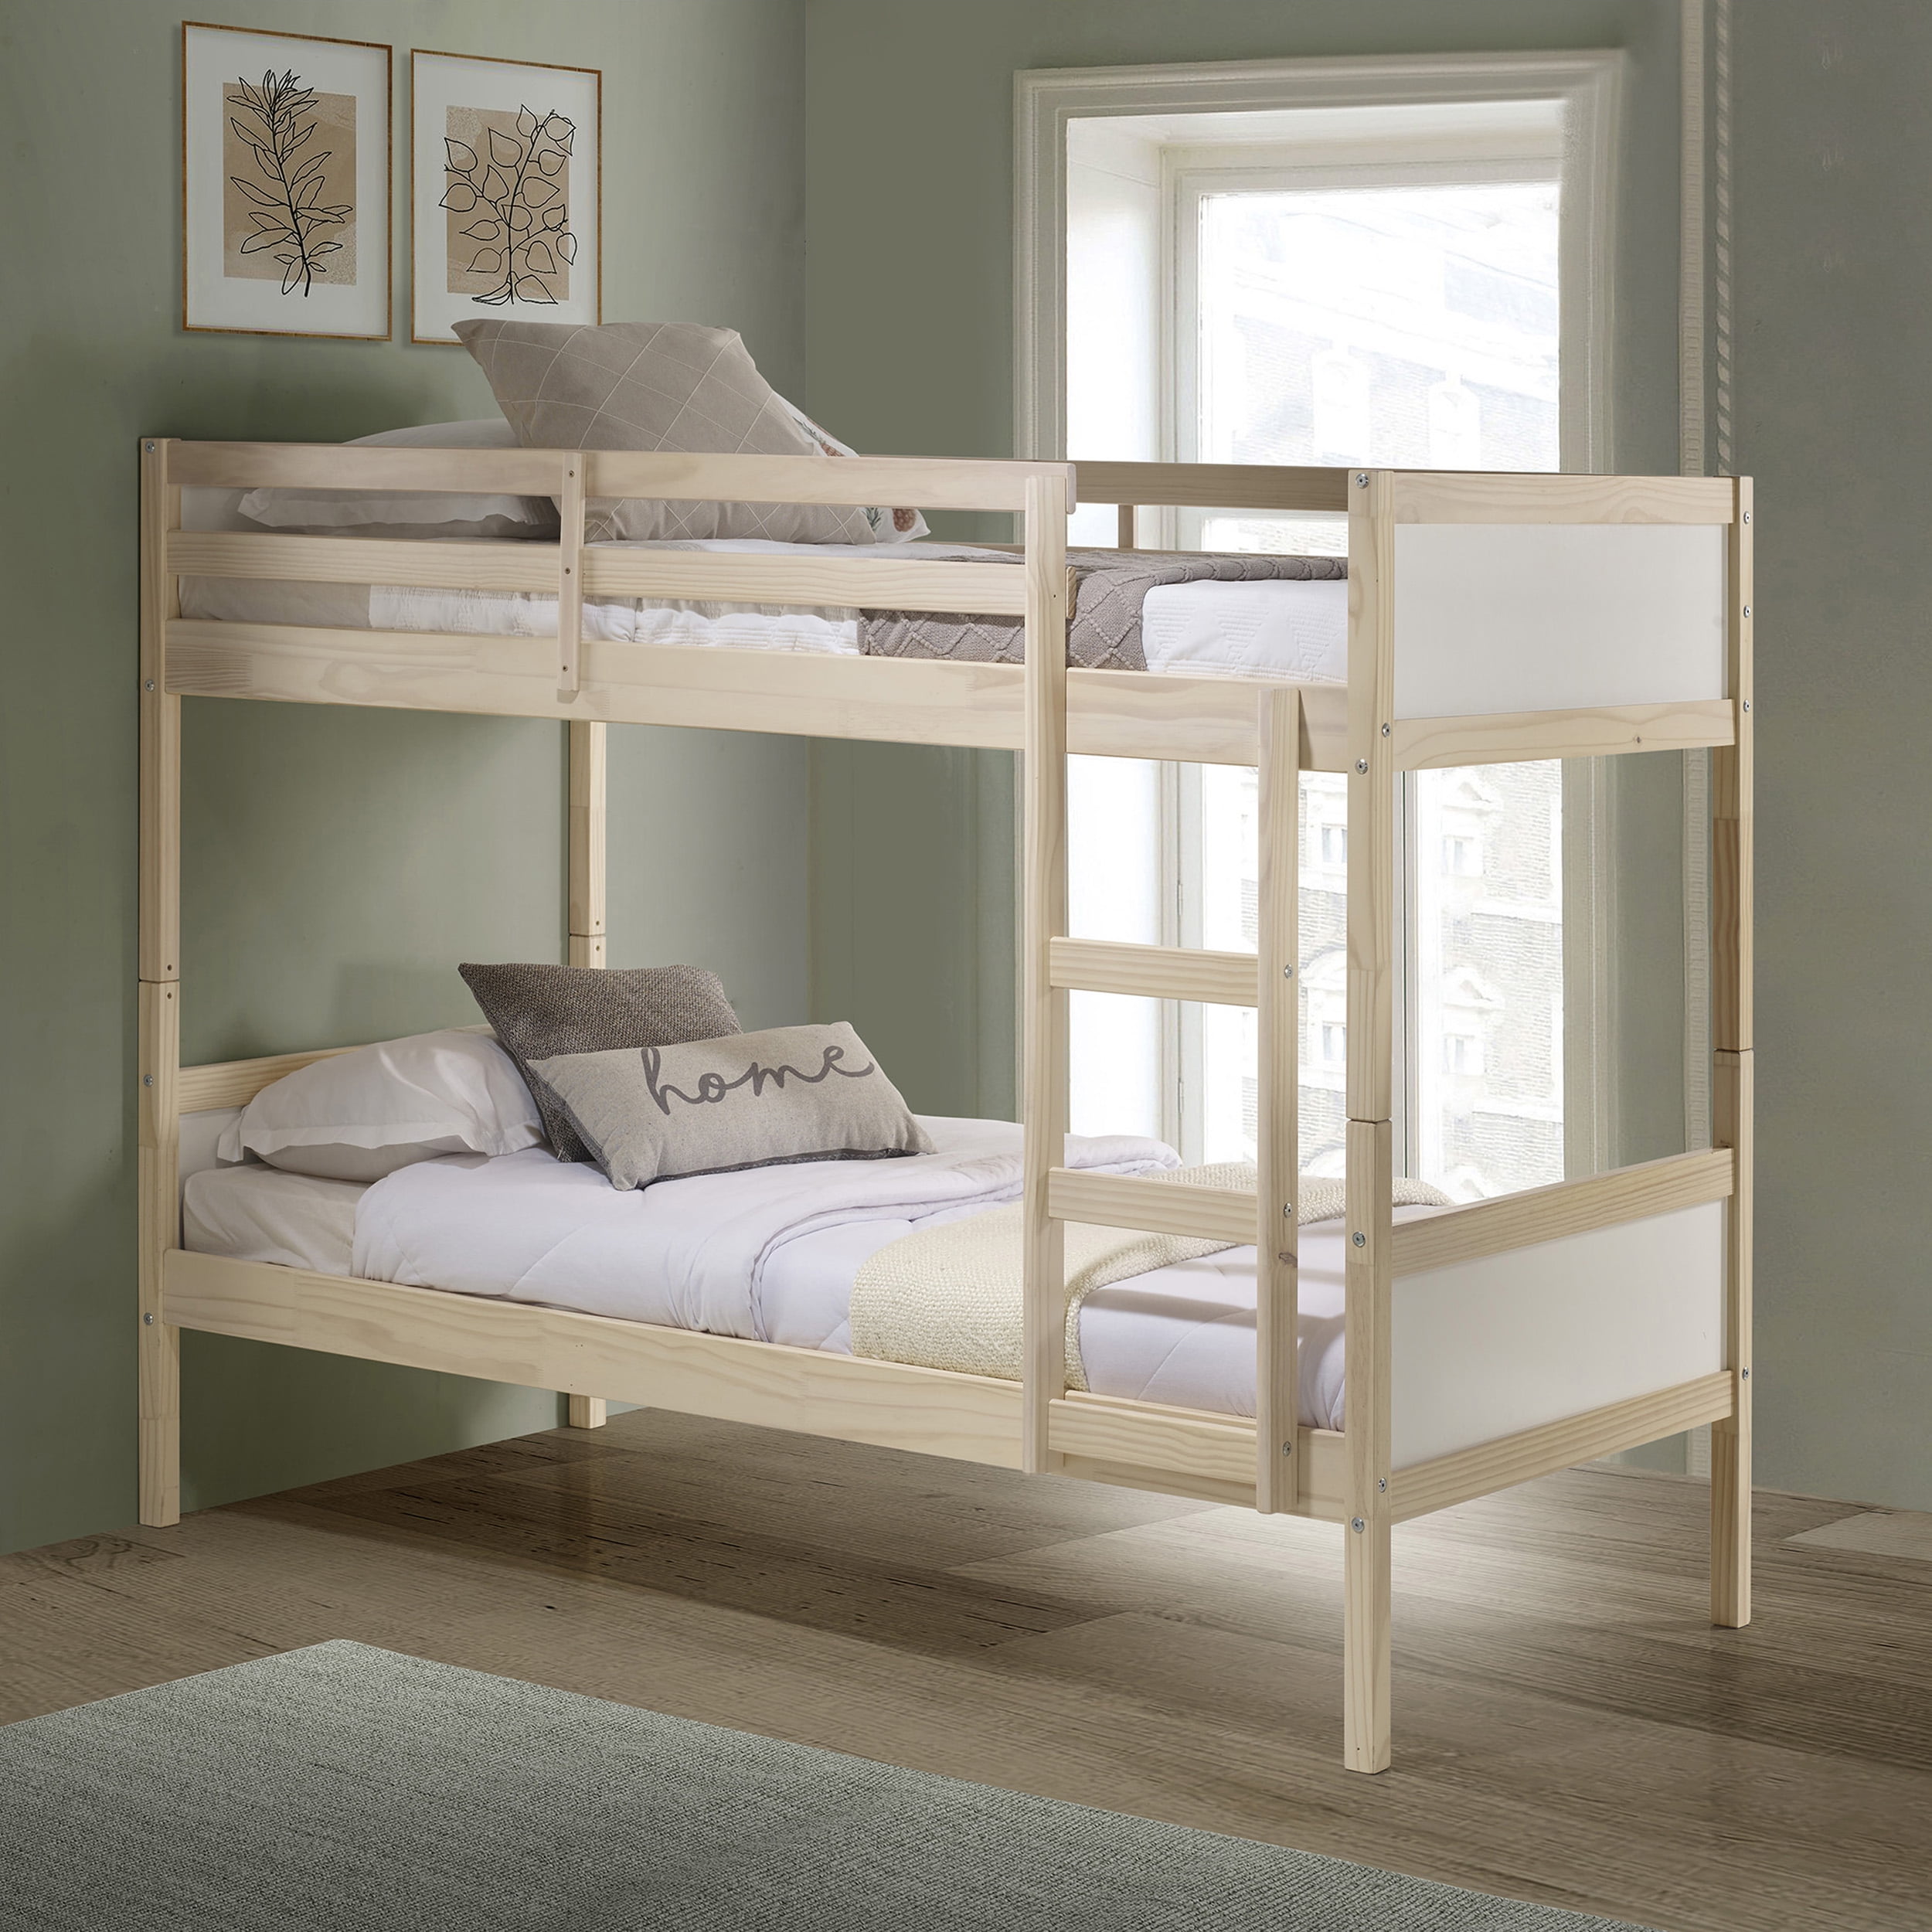 Alaterre Pine Bunk Bed Twin Over, Brazilian Pine Bunk Bed